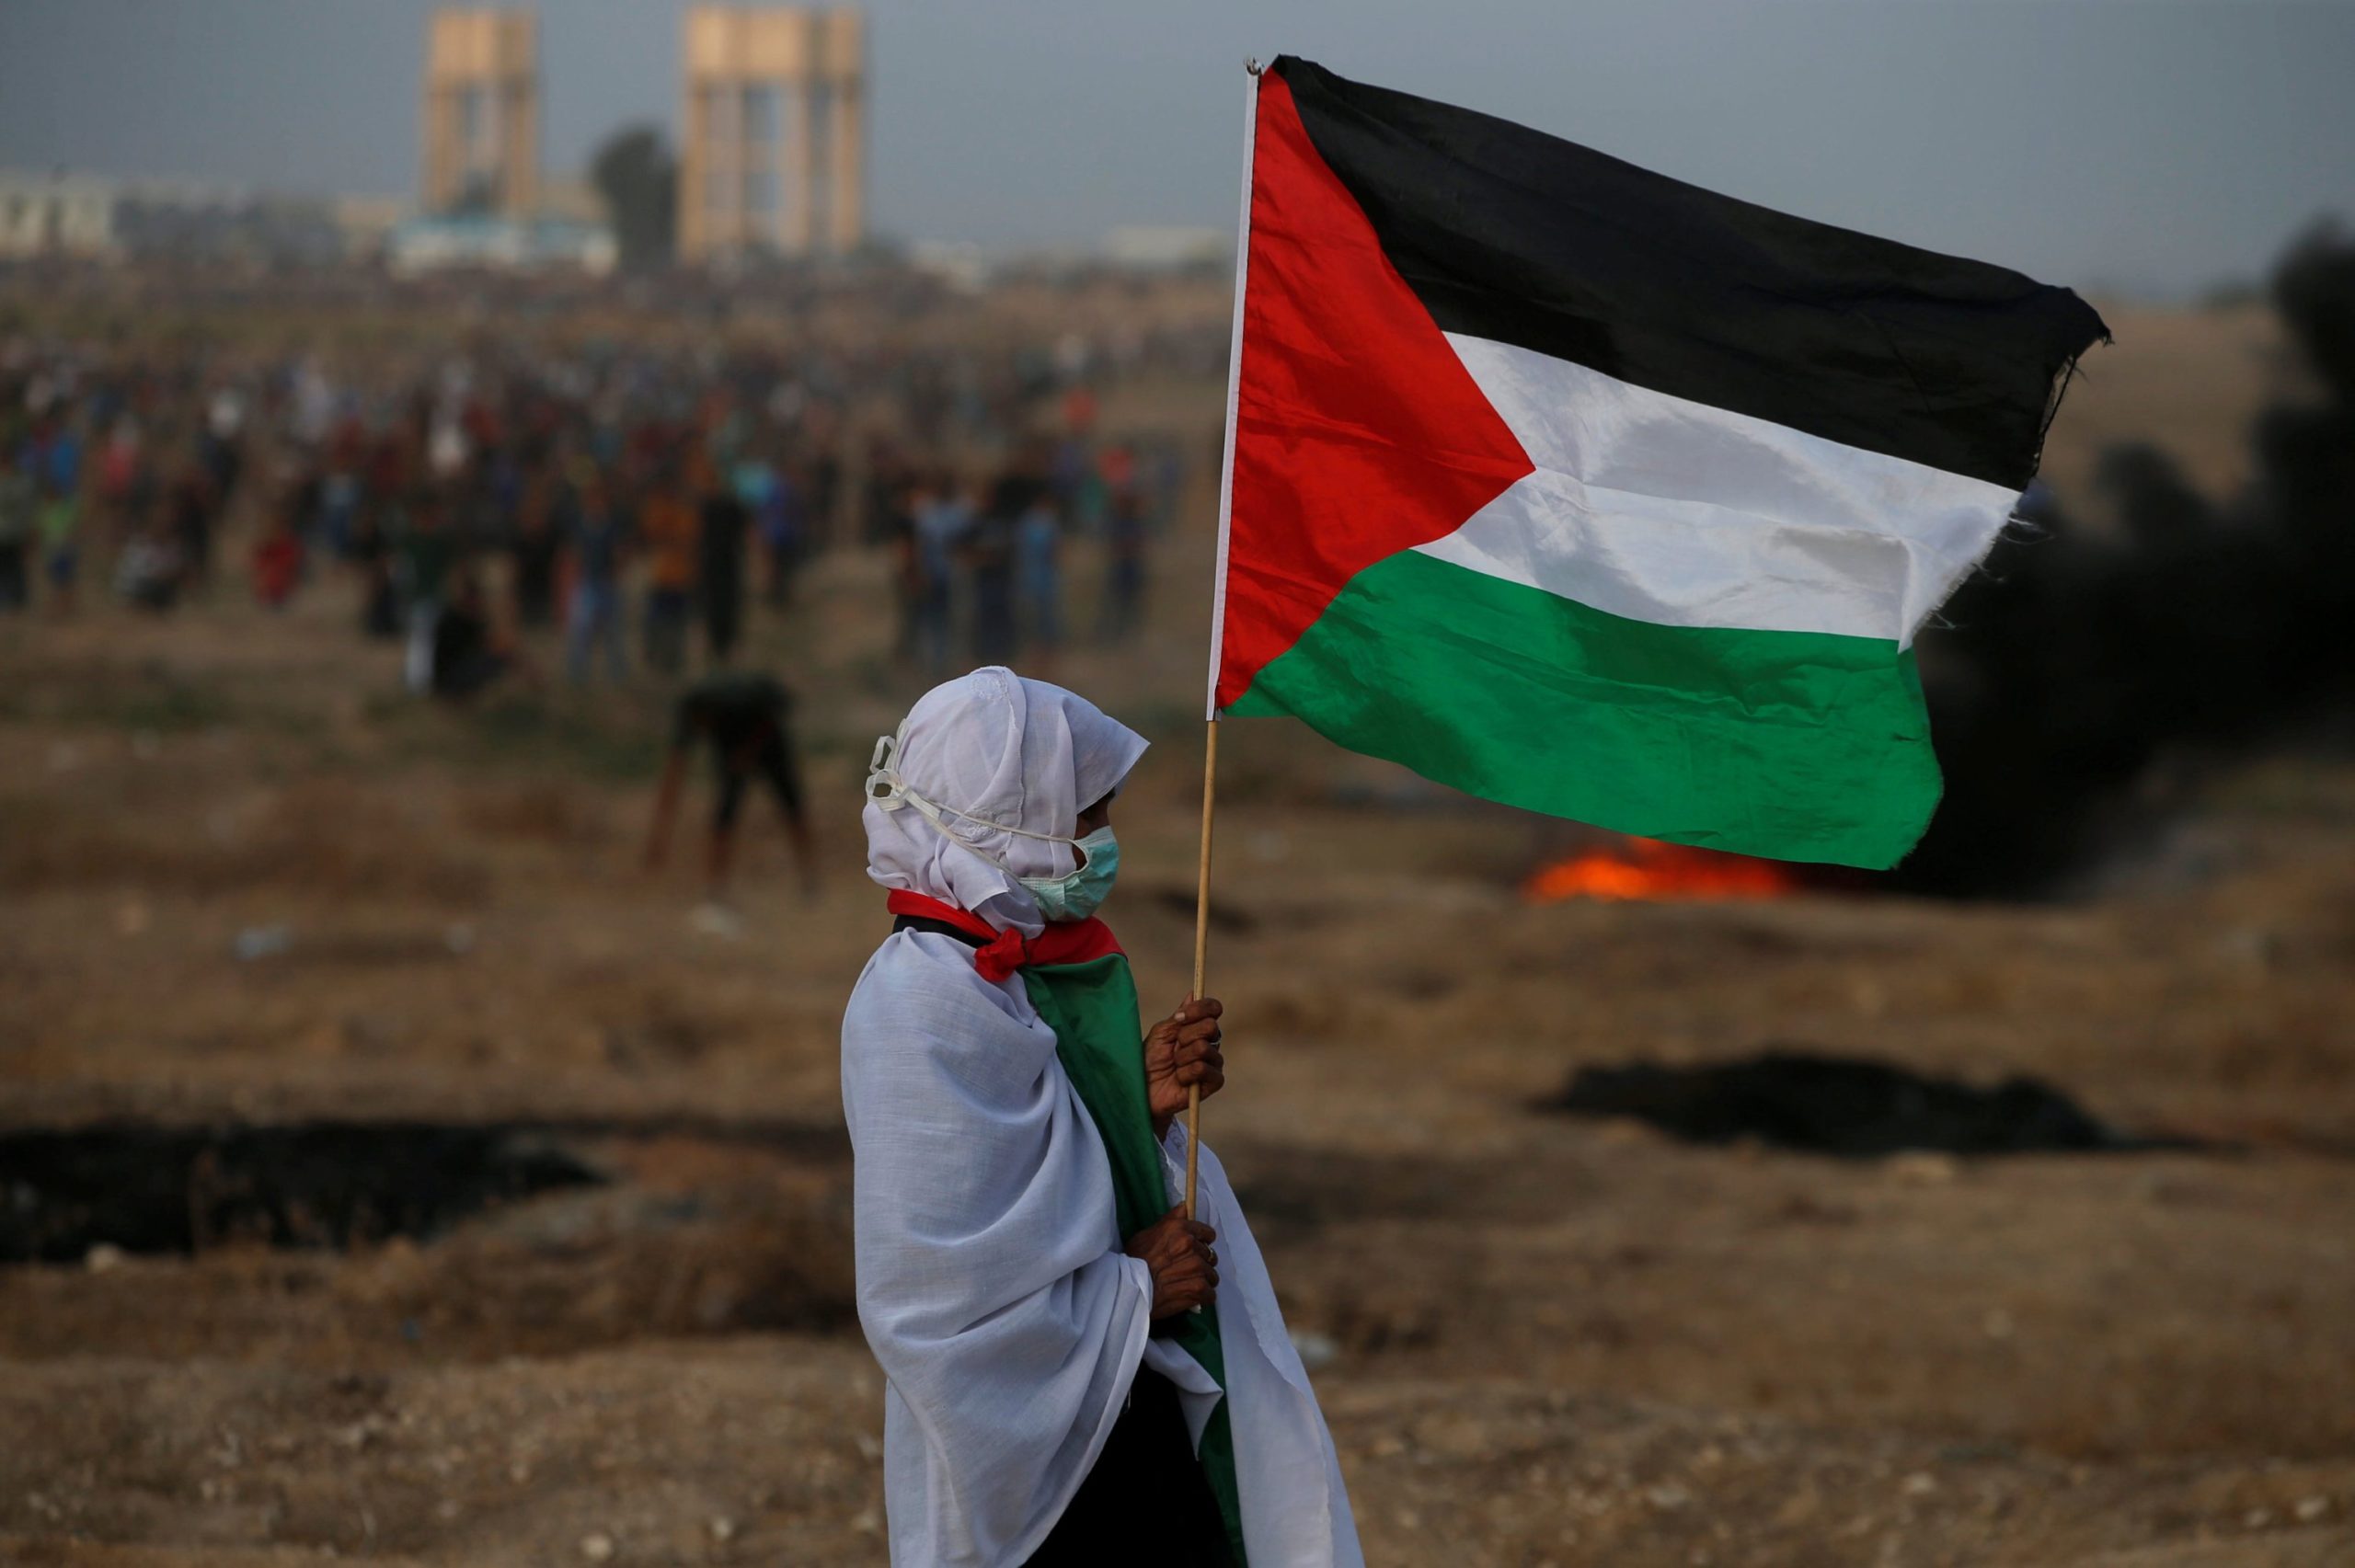 A woman holds a Palestinian flag during a protest calling for lifting the Israeli blockade, Gaza, Oct. 19, 2018. (REUTERS Photo)